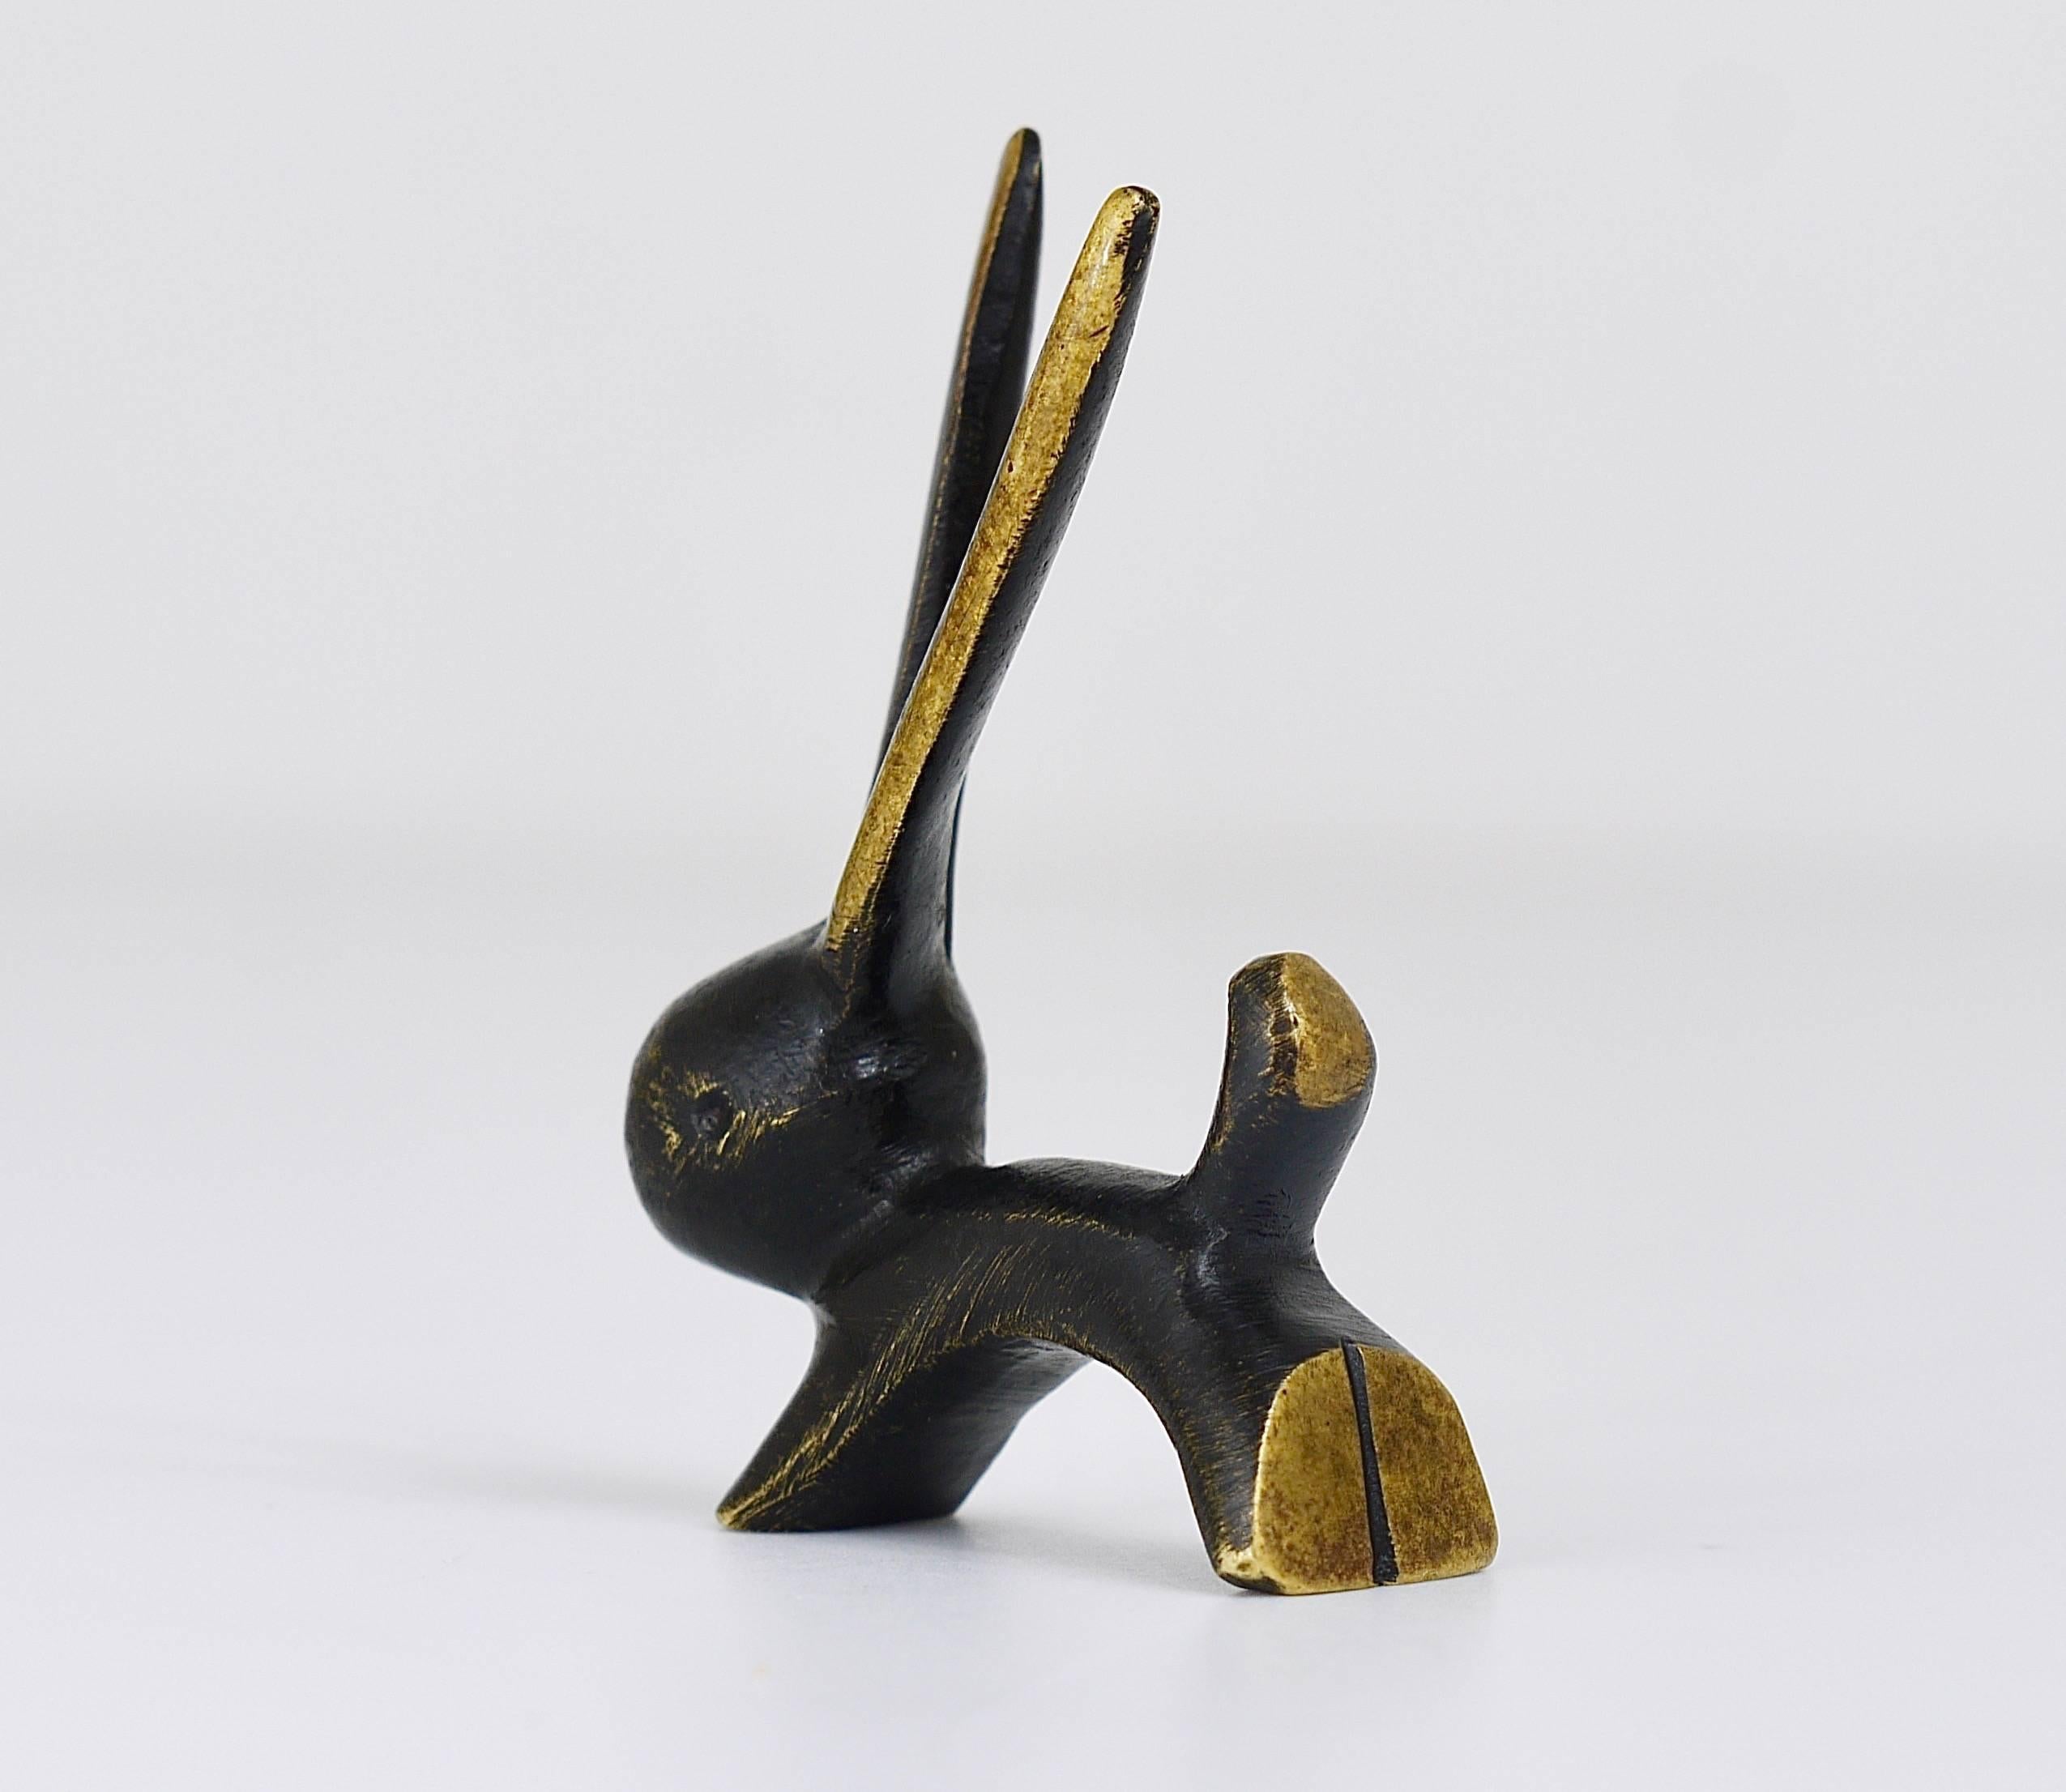 A lovely brass sculpture, displaying a little rabbit. Designed by Walter Bosse, executed in the 1950s by Hertha Baller in Austria. In very good condition. We offer other Walter Bosse brass objects in our other listings.